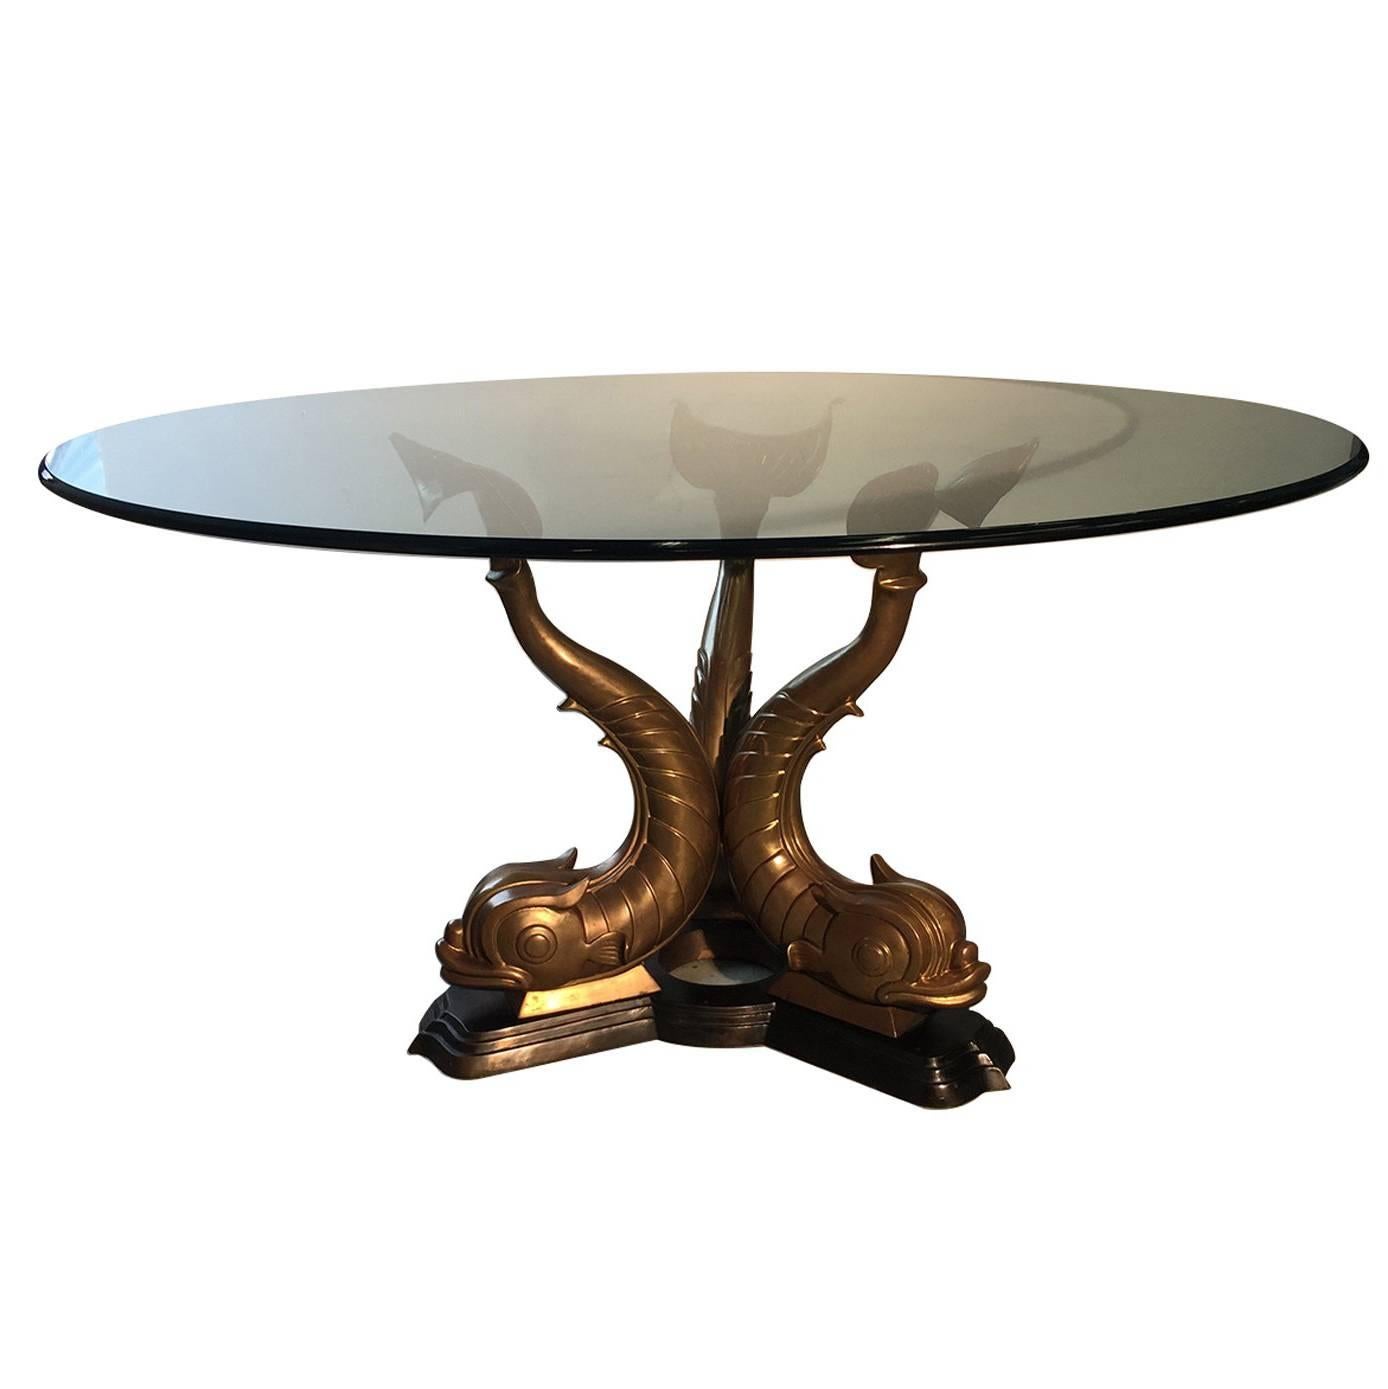 Midcentury Bronze Triple Dolphin Base Glass Top Table